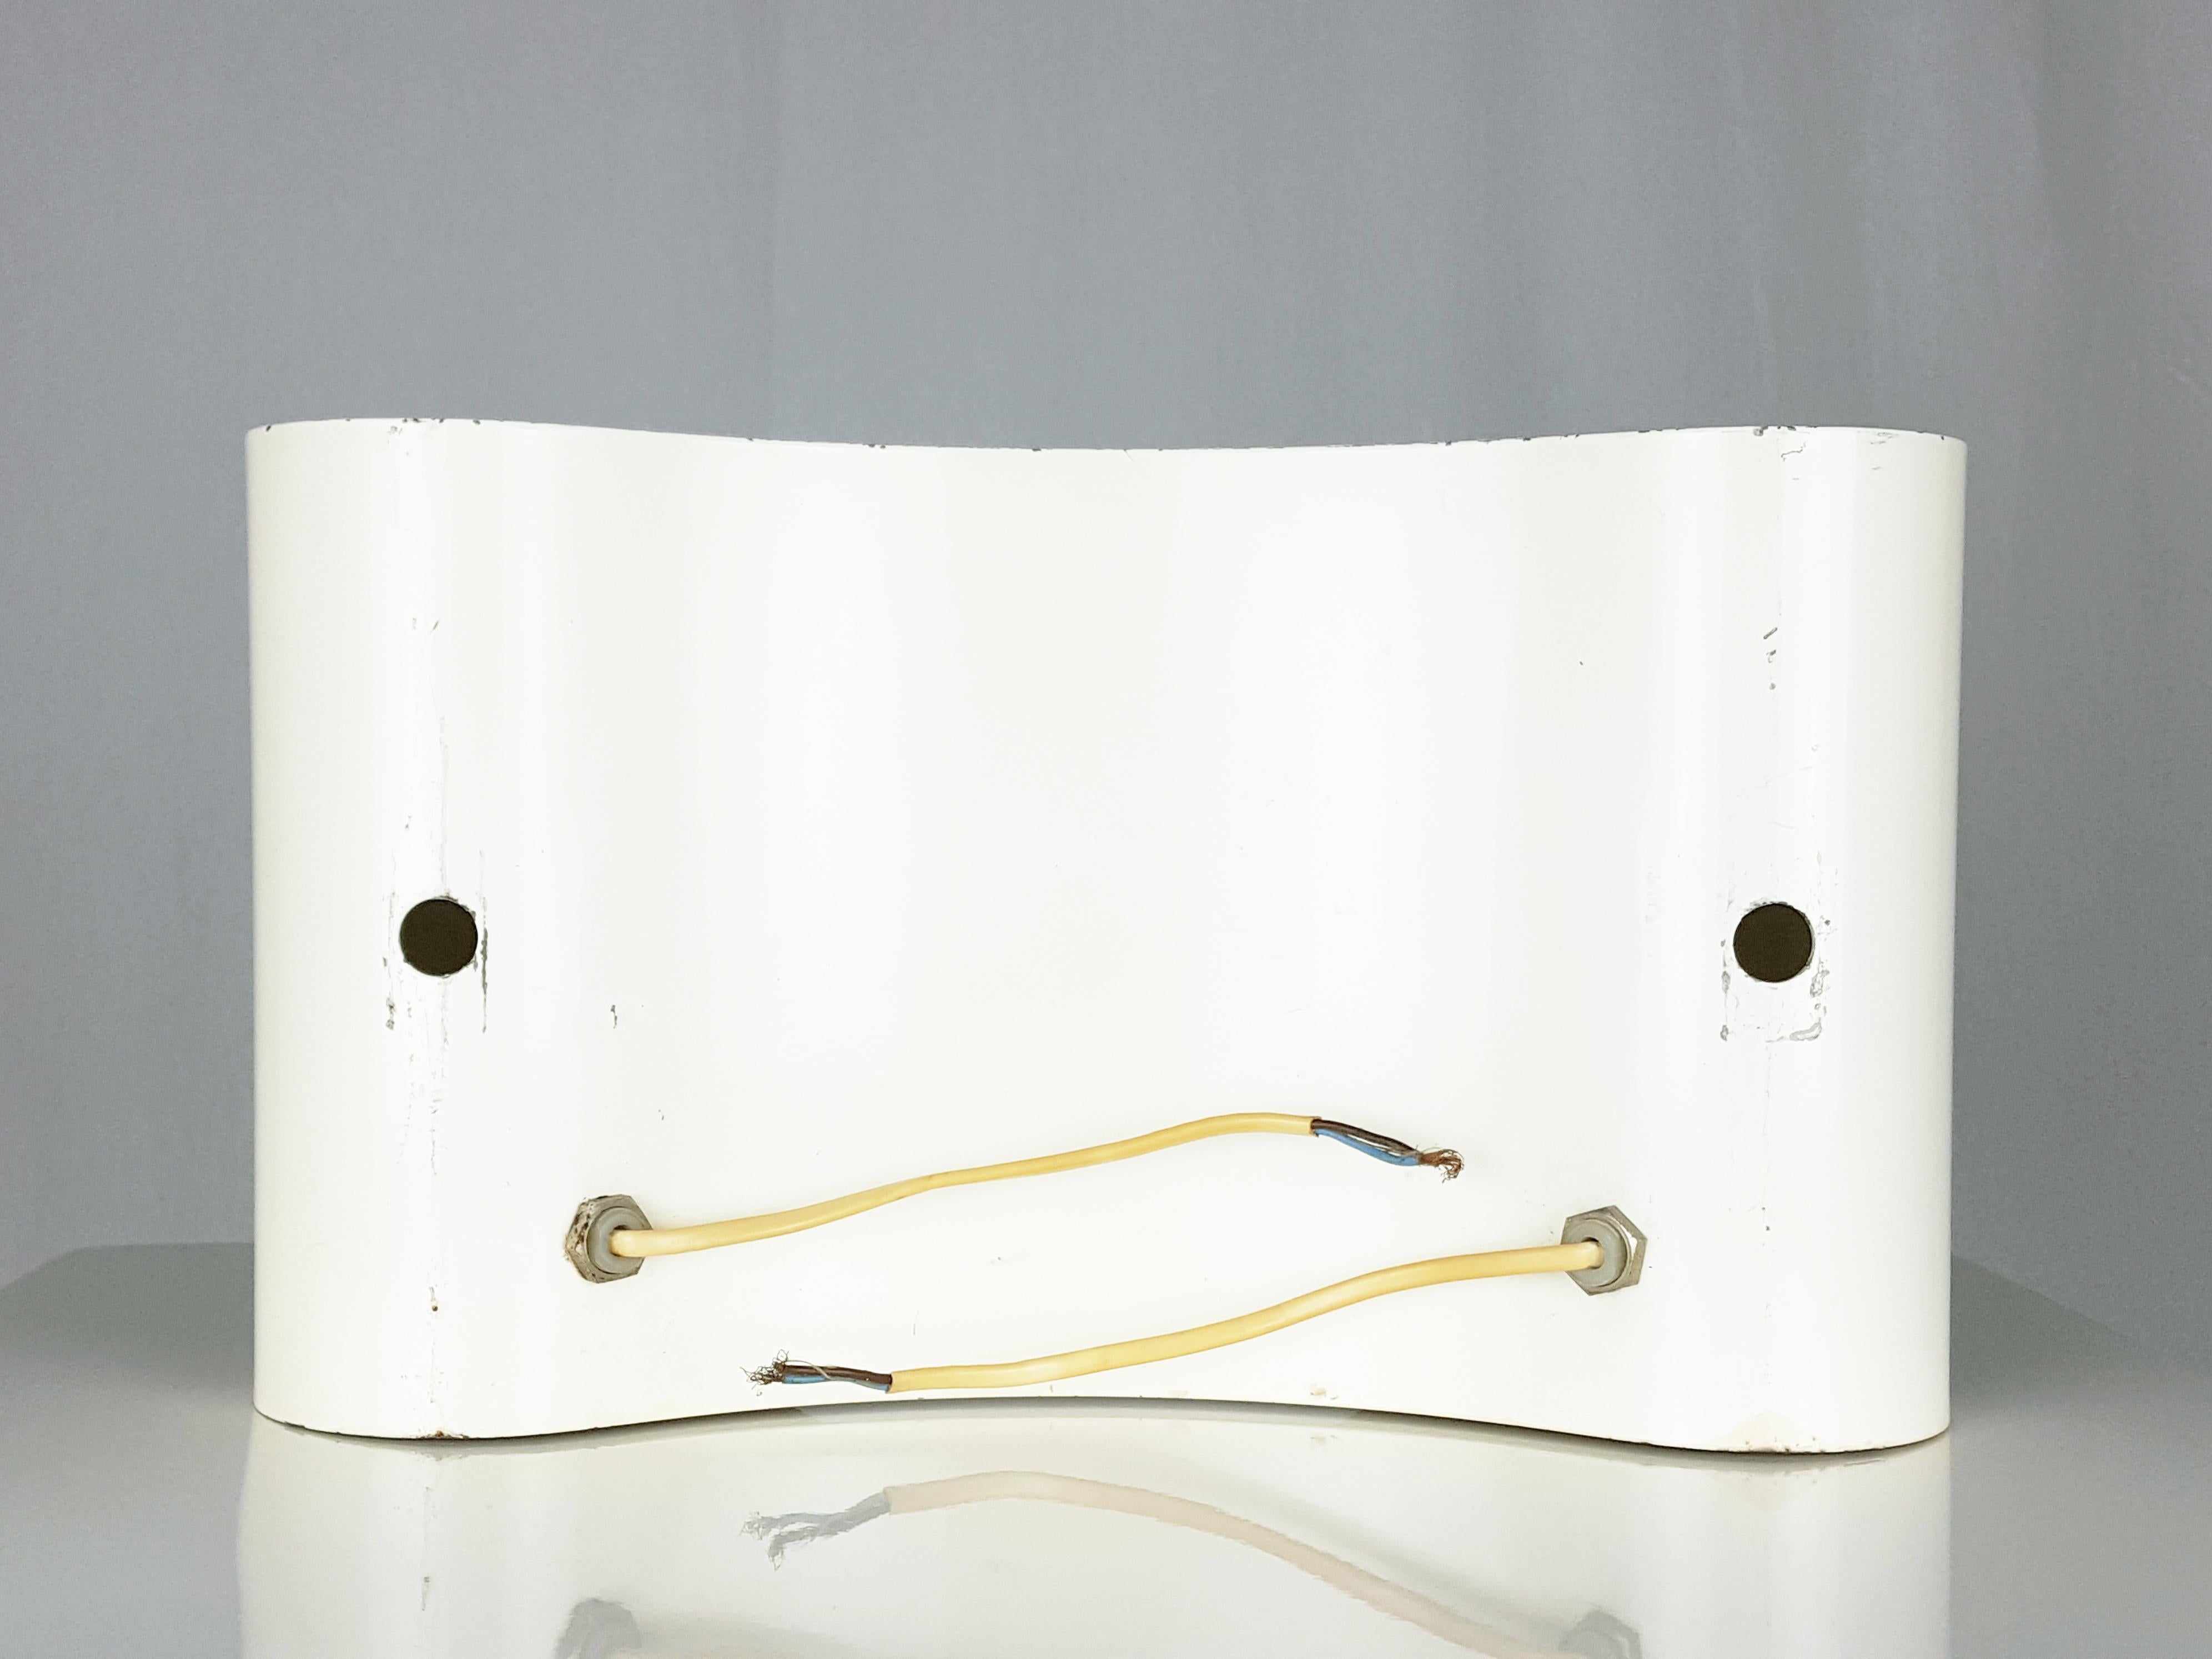 White Laquered Metal 2-Lights Sconce Foglio by Afra Tobia Scarpa for Flos, 1966 For Sale 1